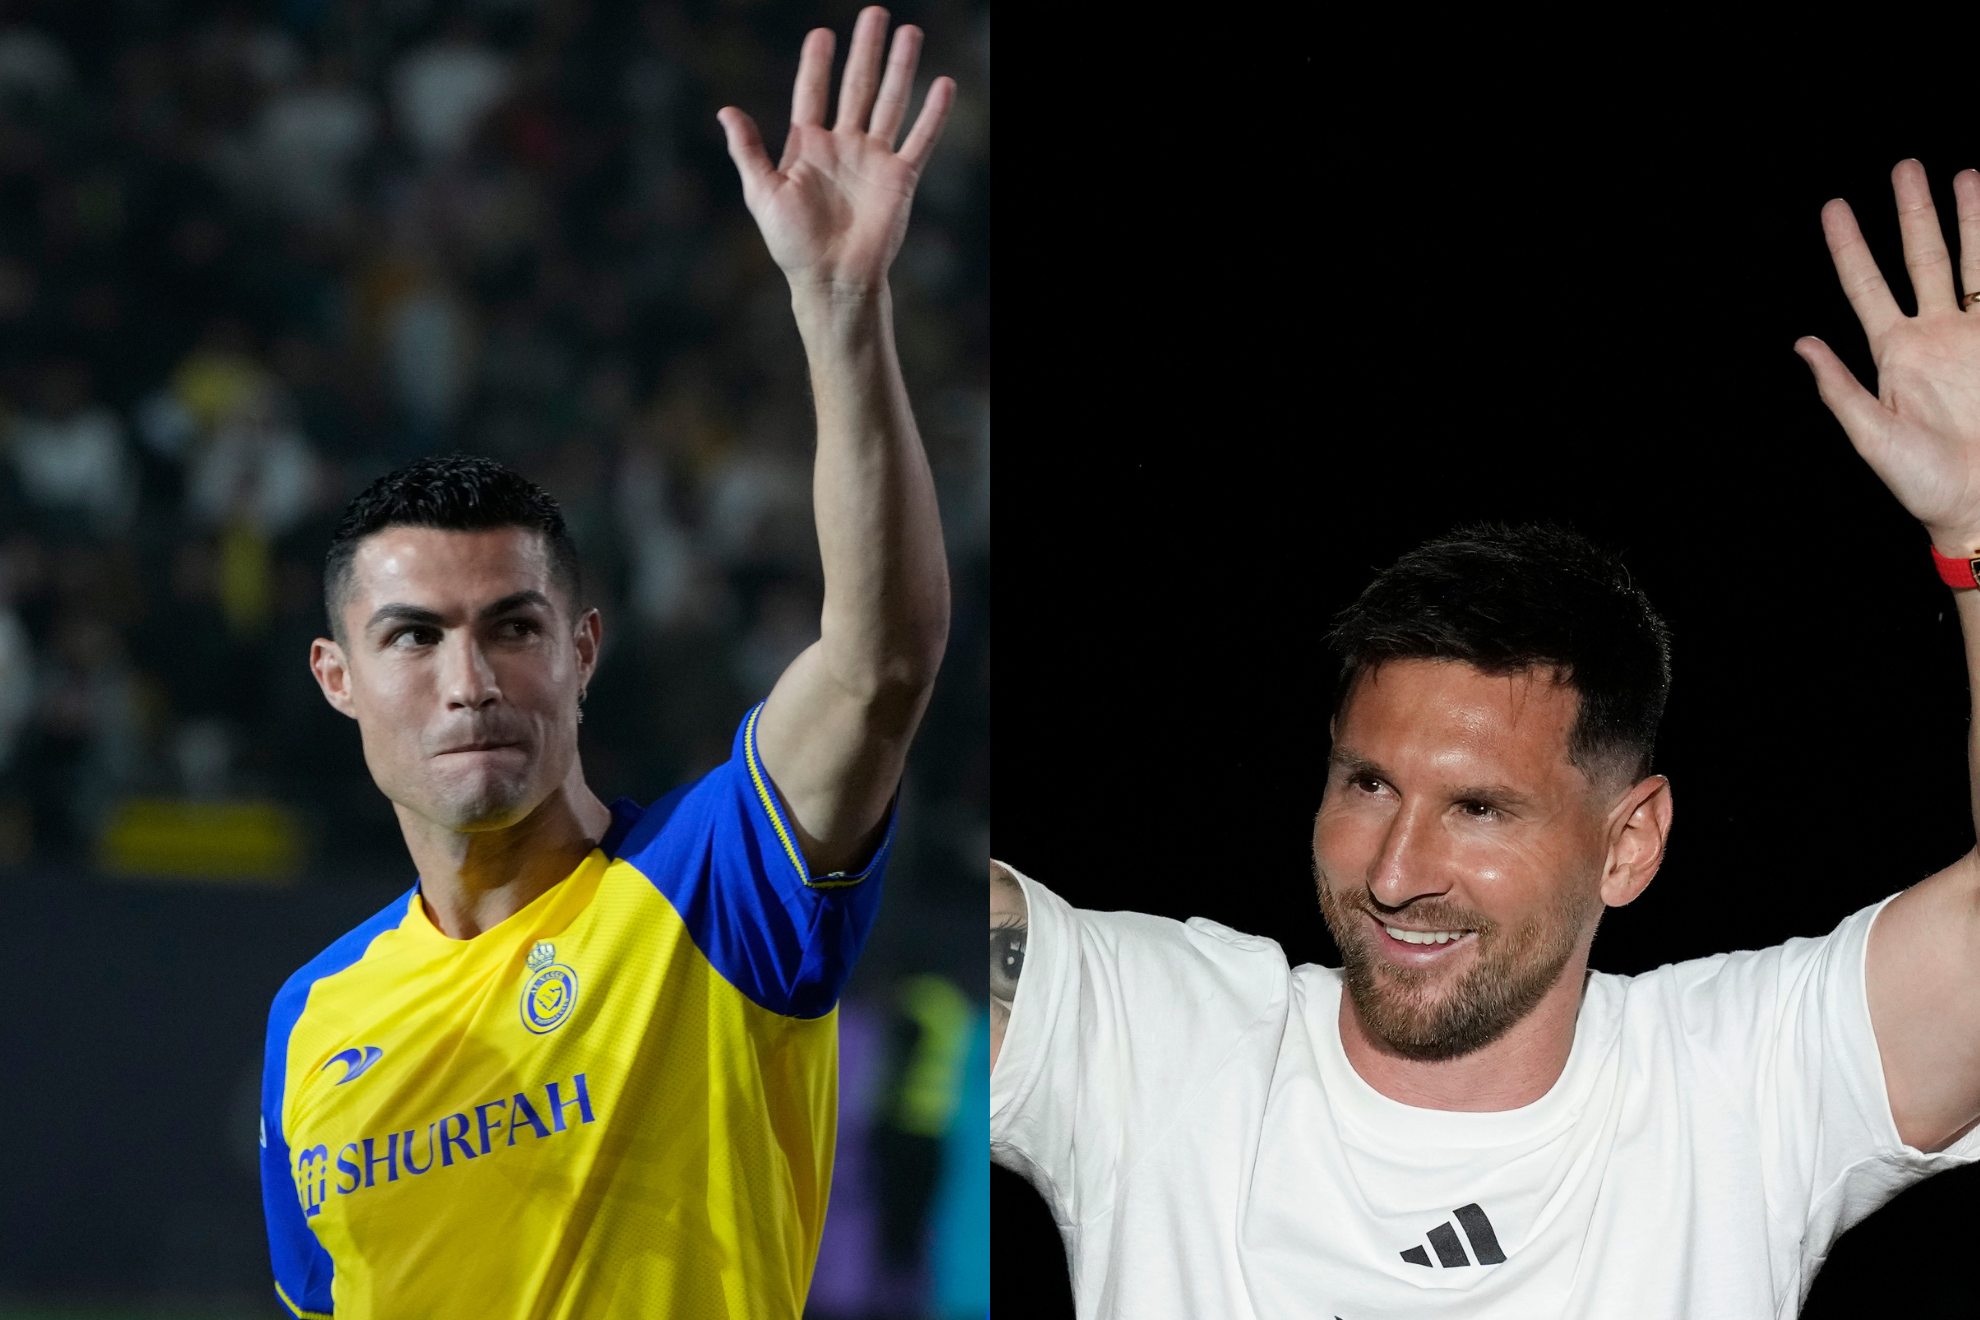 Both Messi and Ronaldo changed teams in the same calendar year for the first time ever.